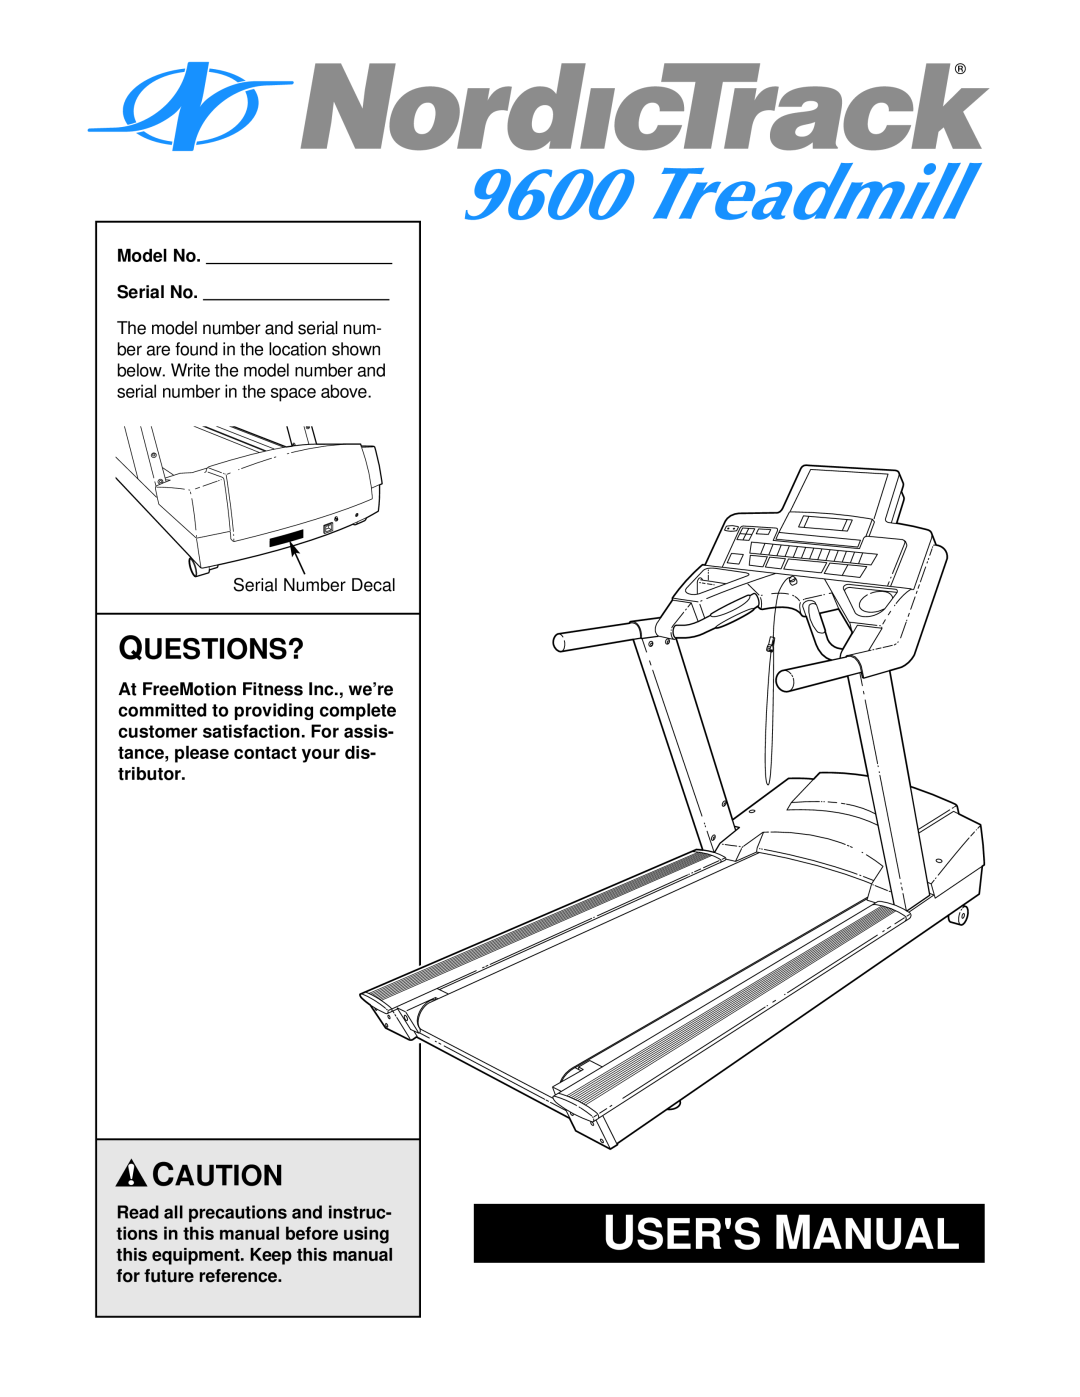 NordicTrack 9600 user manual Questions?, C Aution, Model No Serial No, Serial Number Decal, U Sers, M Anual 